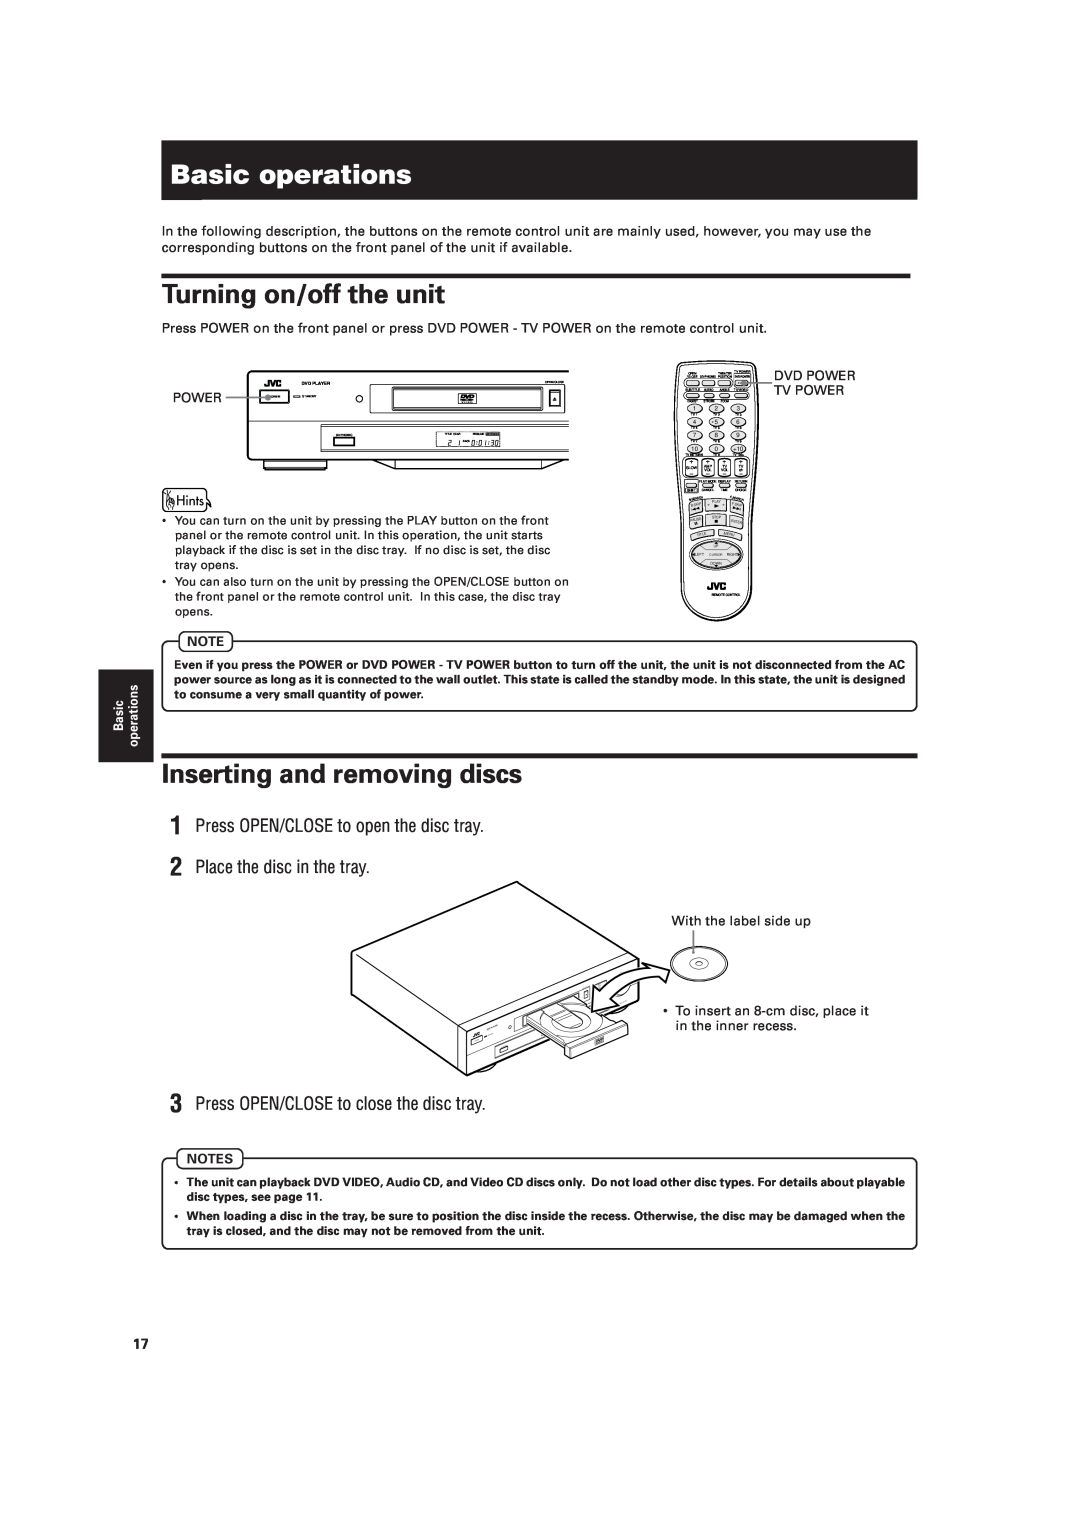 JVC XV-521BK manual Basic operations, Turning on/off the unit, Inserting and removing discs 